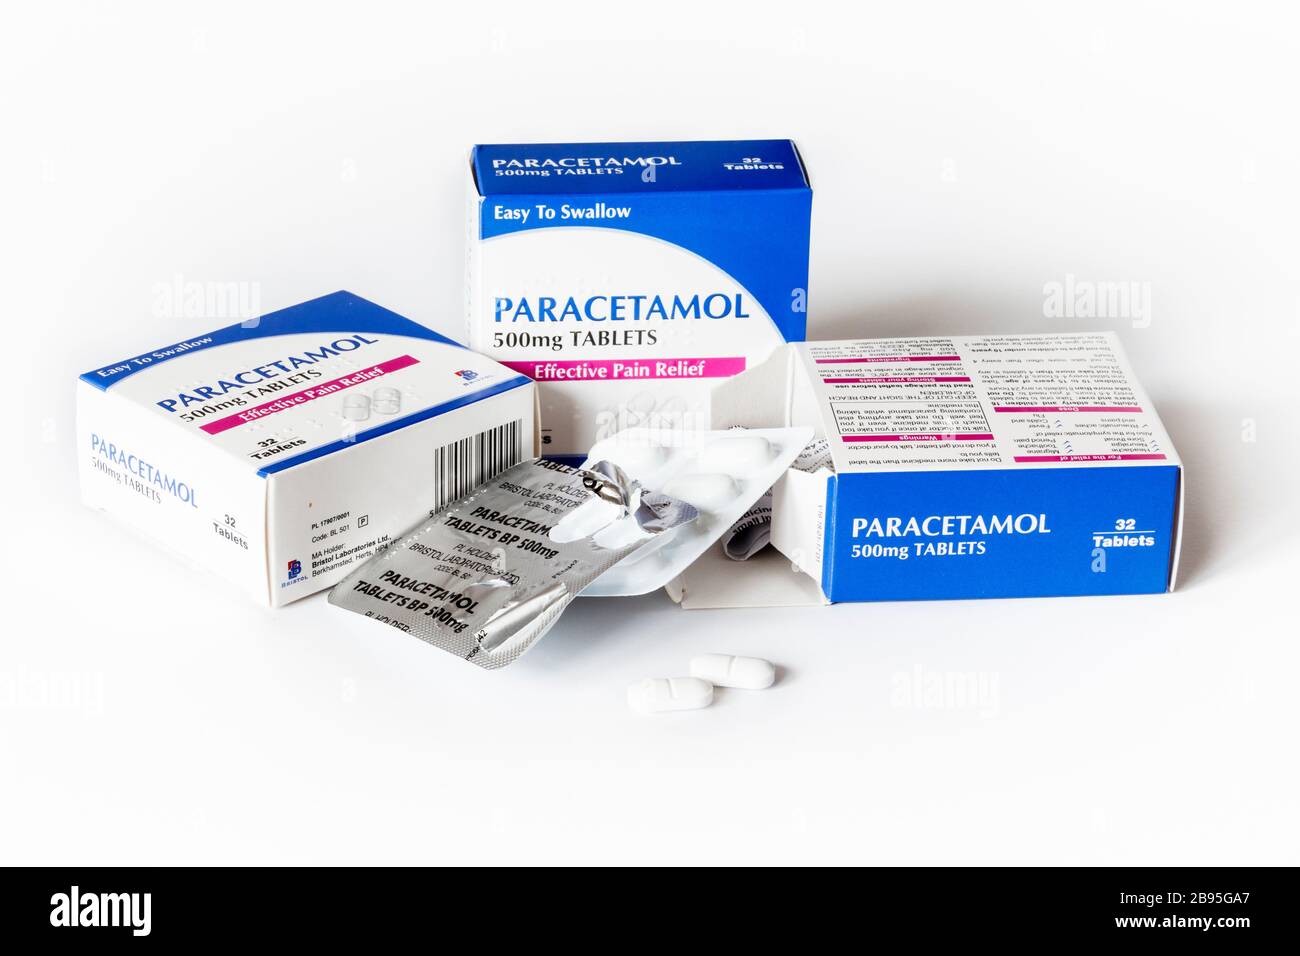 Boxes of paracetamol tablets and blister packs, two tablets removed, against a plain background Stock Photo